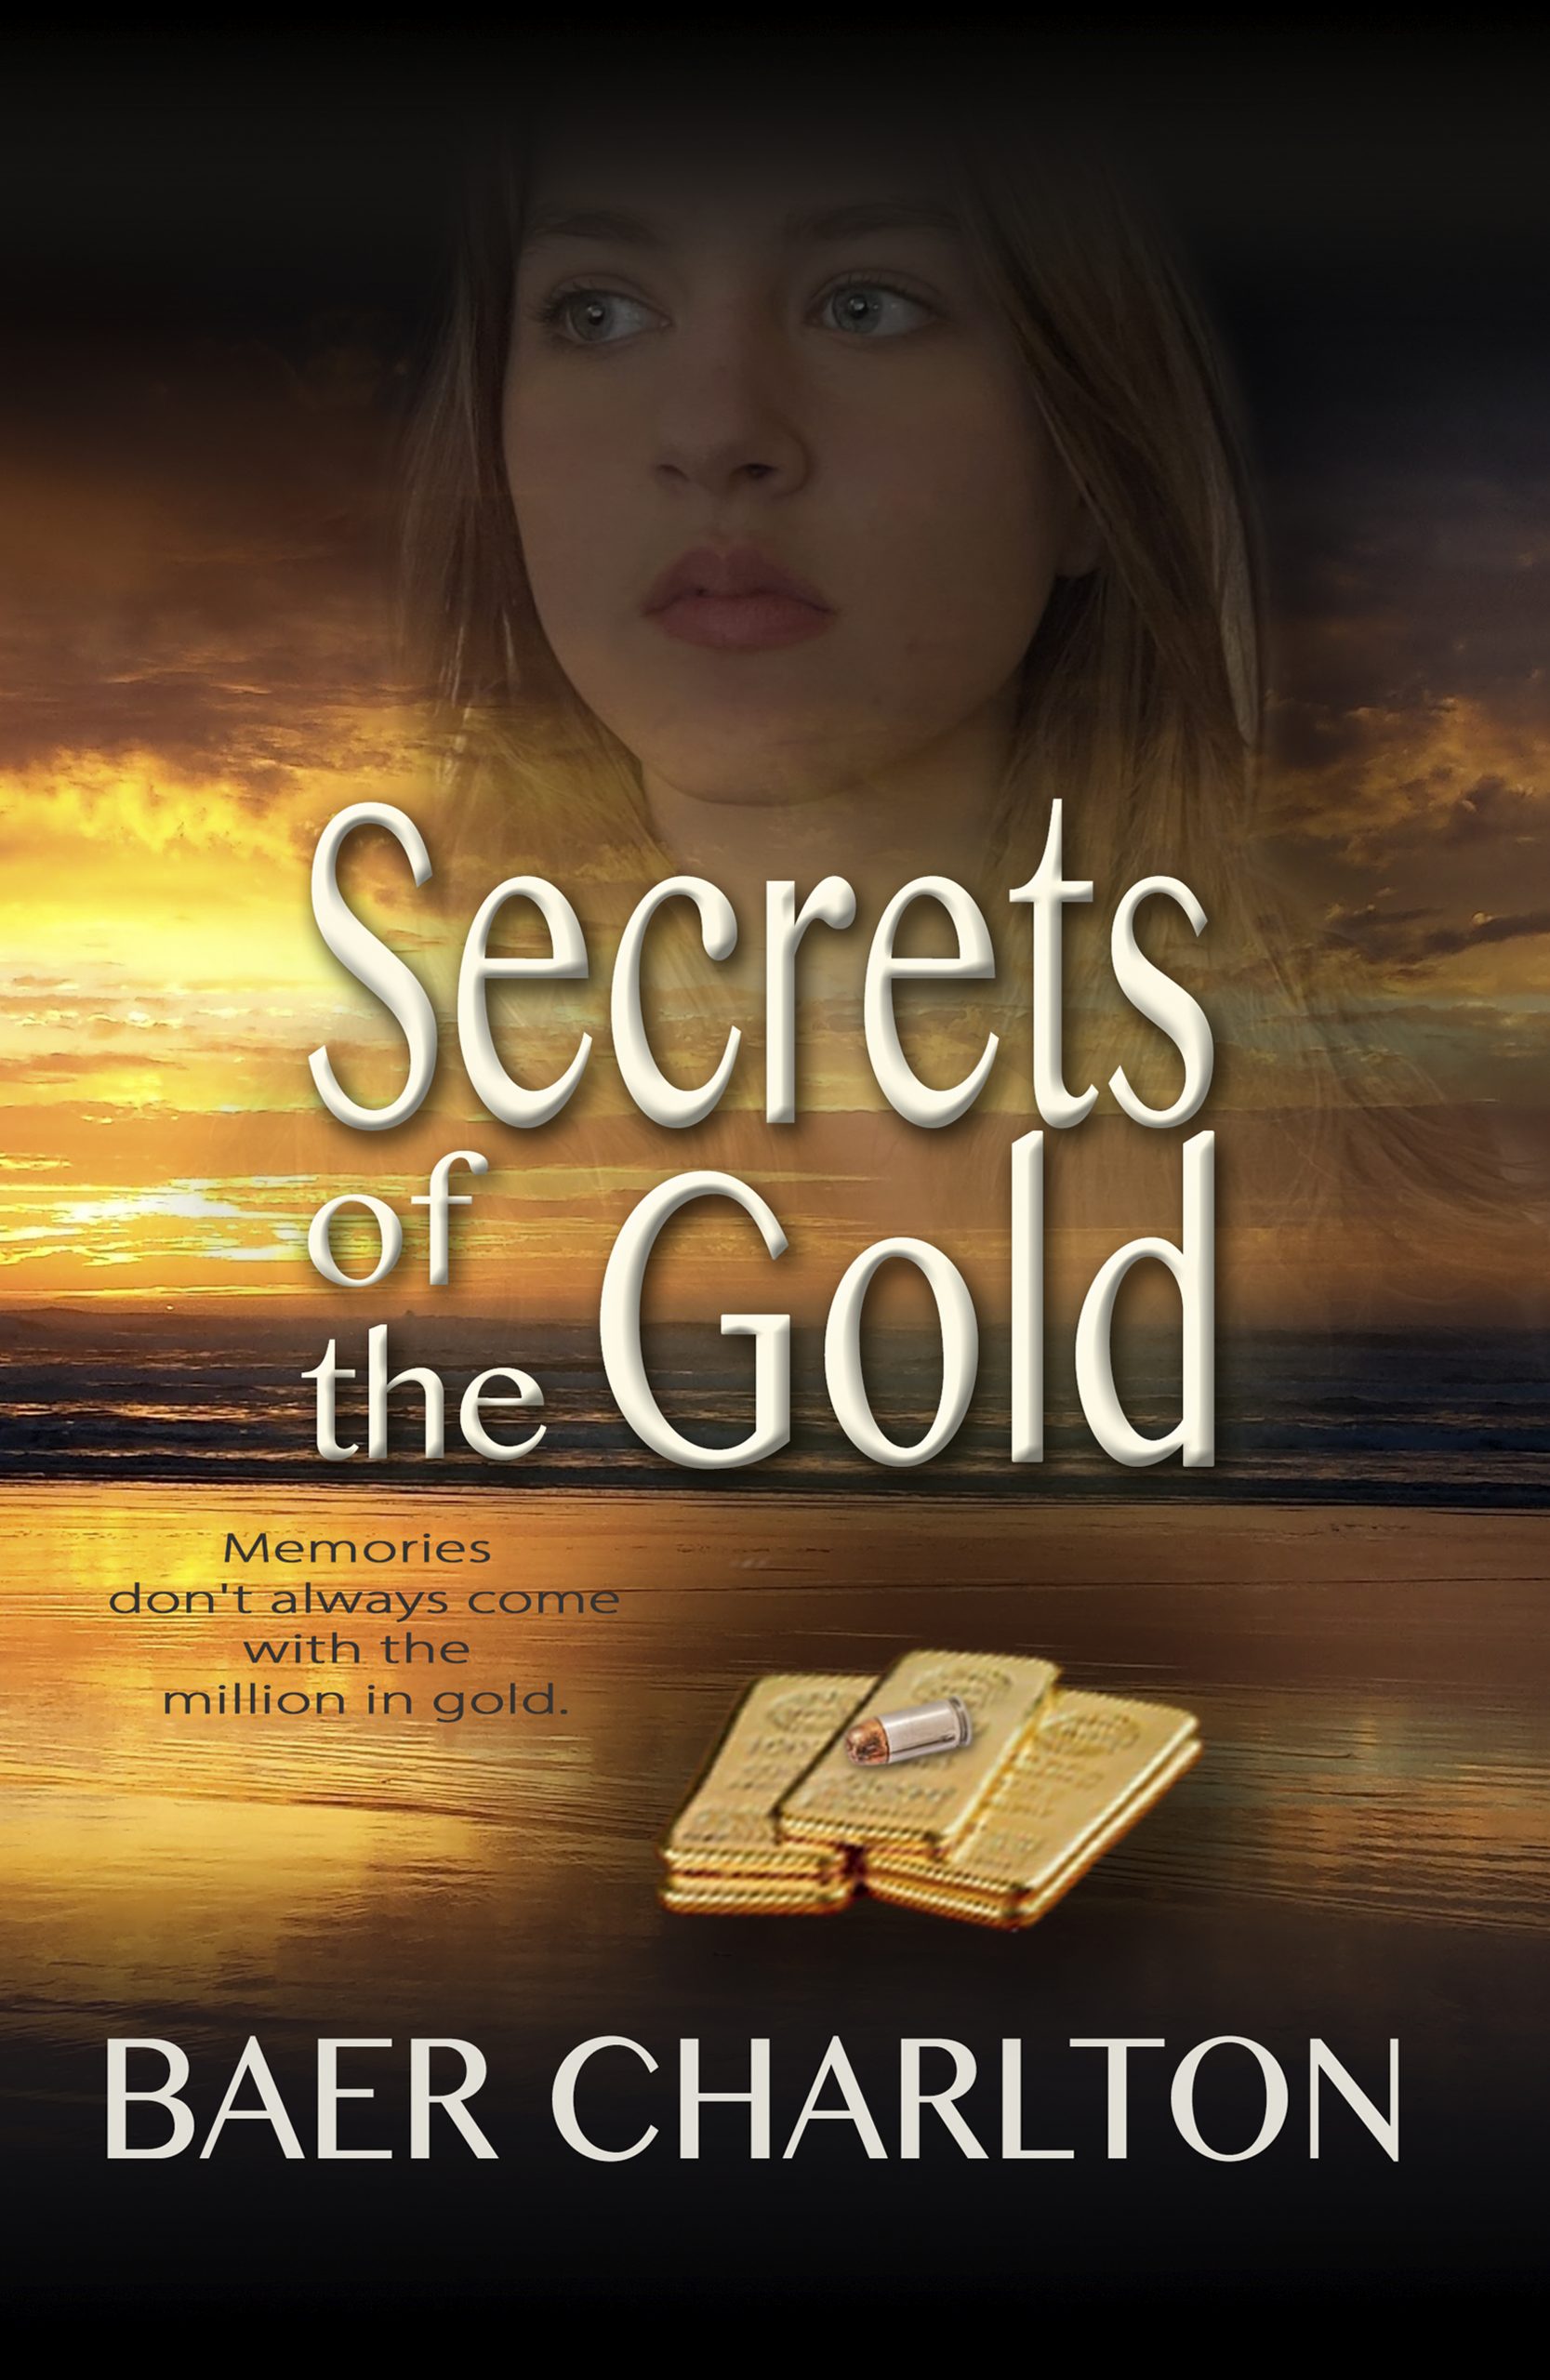 Secrets of the Gold by Baer Charlton